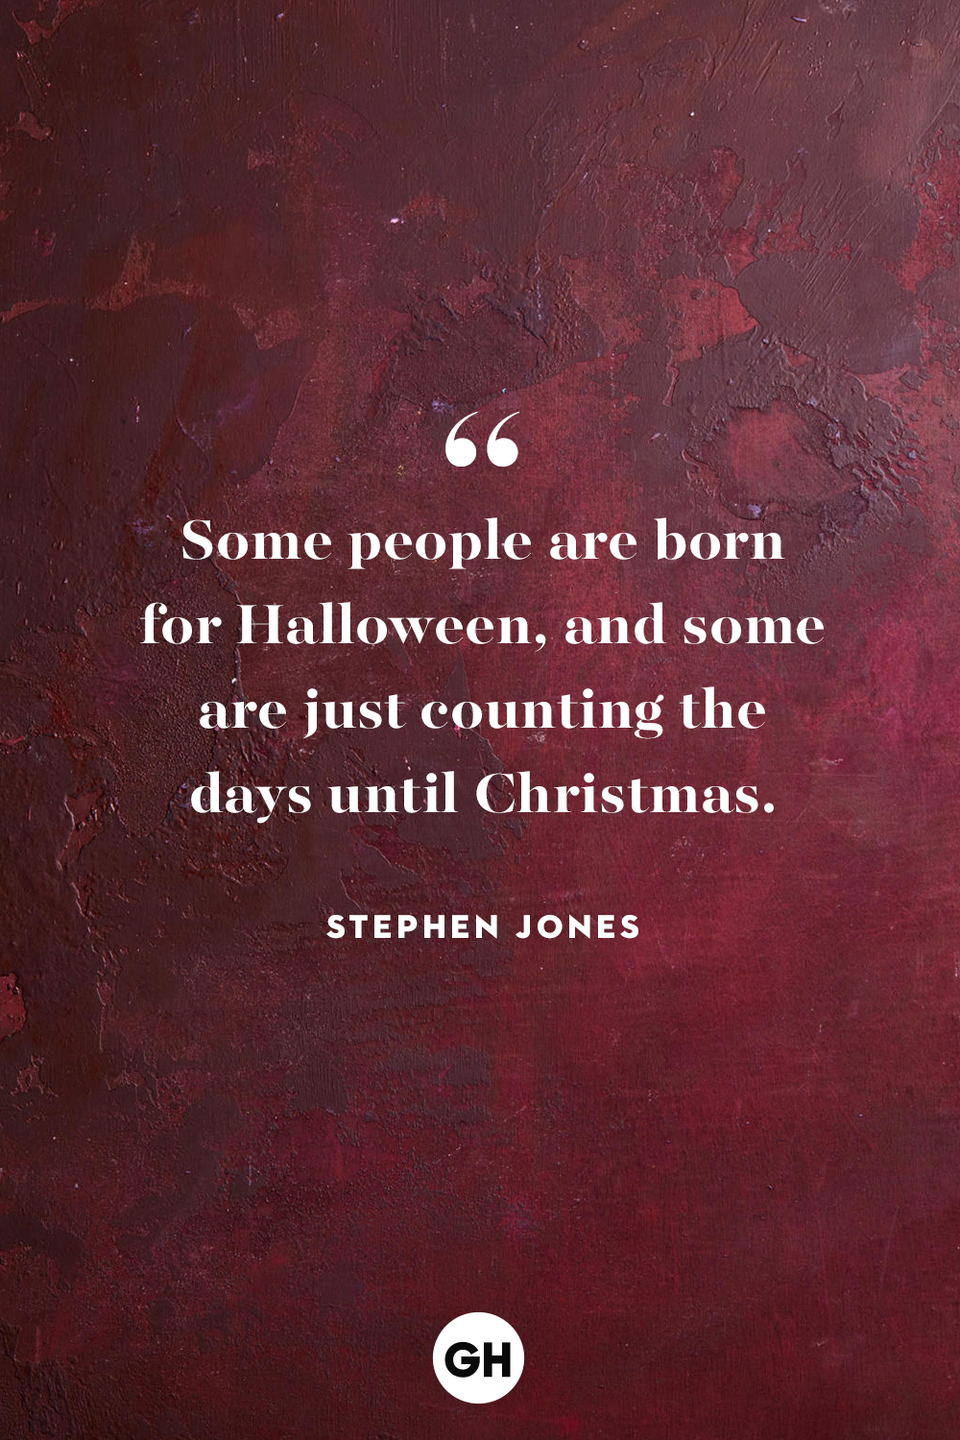 <p>Some people are born for Halloween, and some are just counting the days until Christmas.</p>